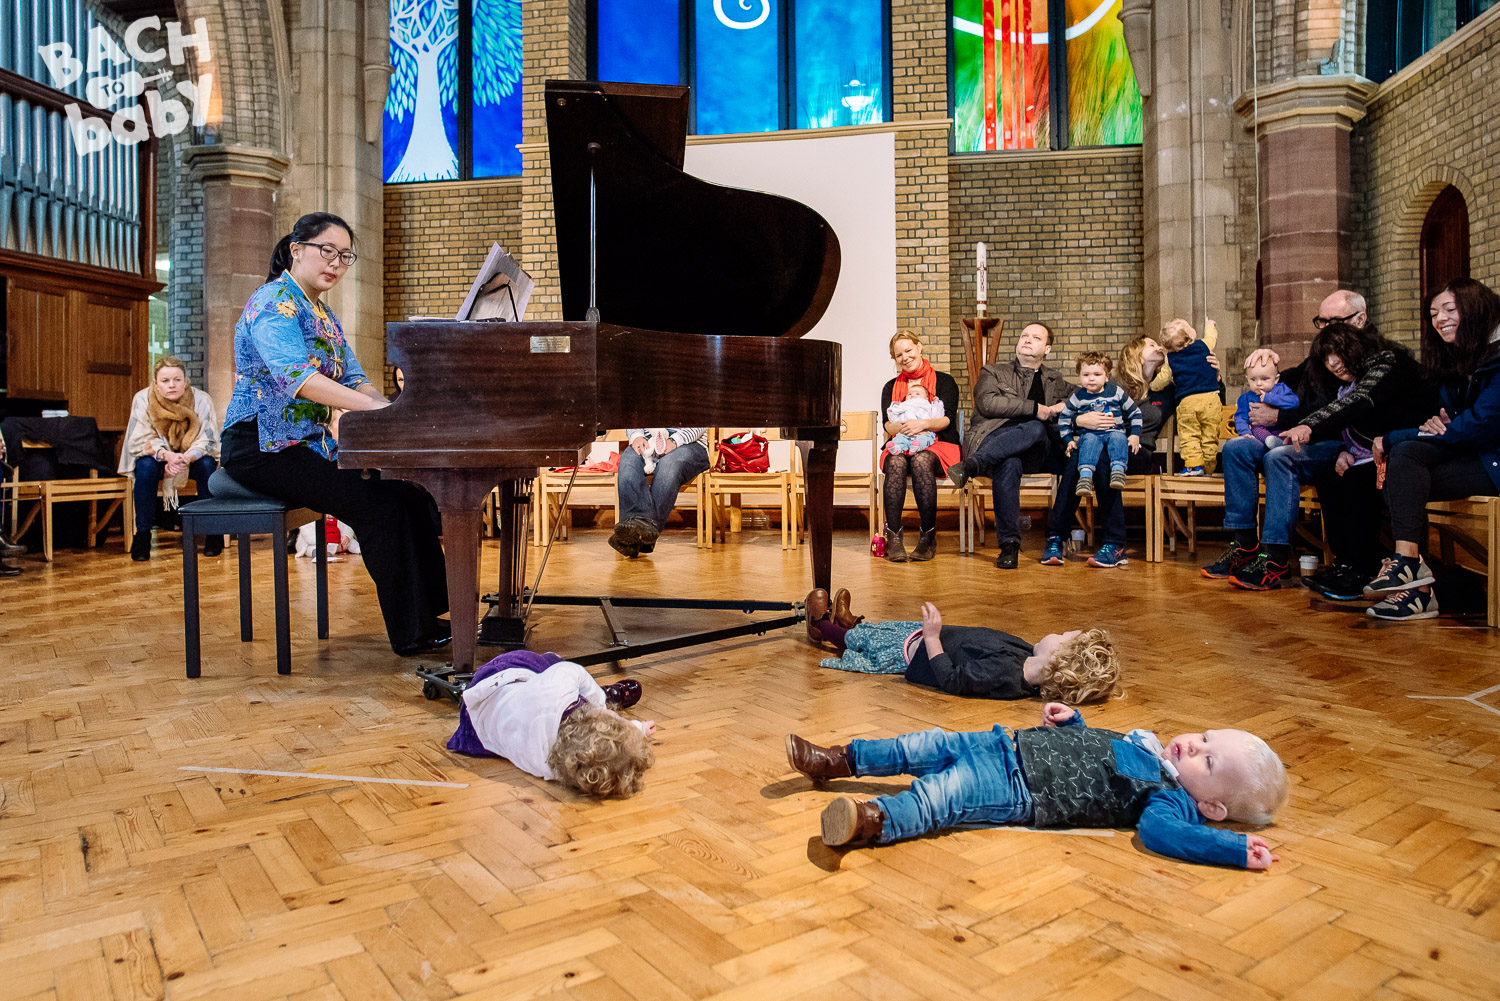 A group of adults and babies watching a pianist perform